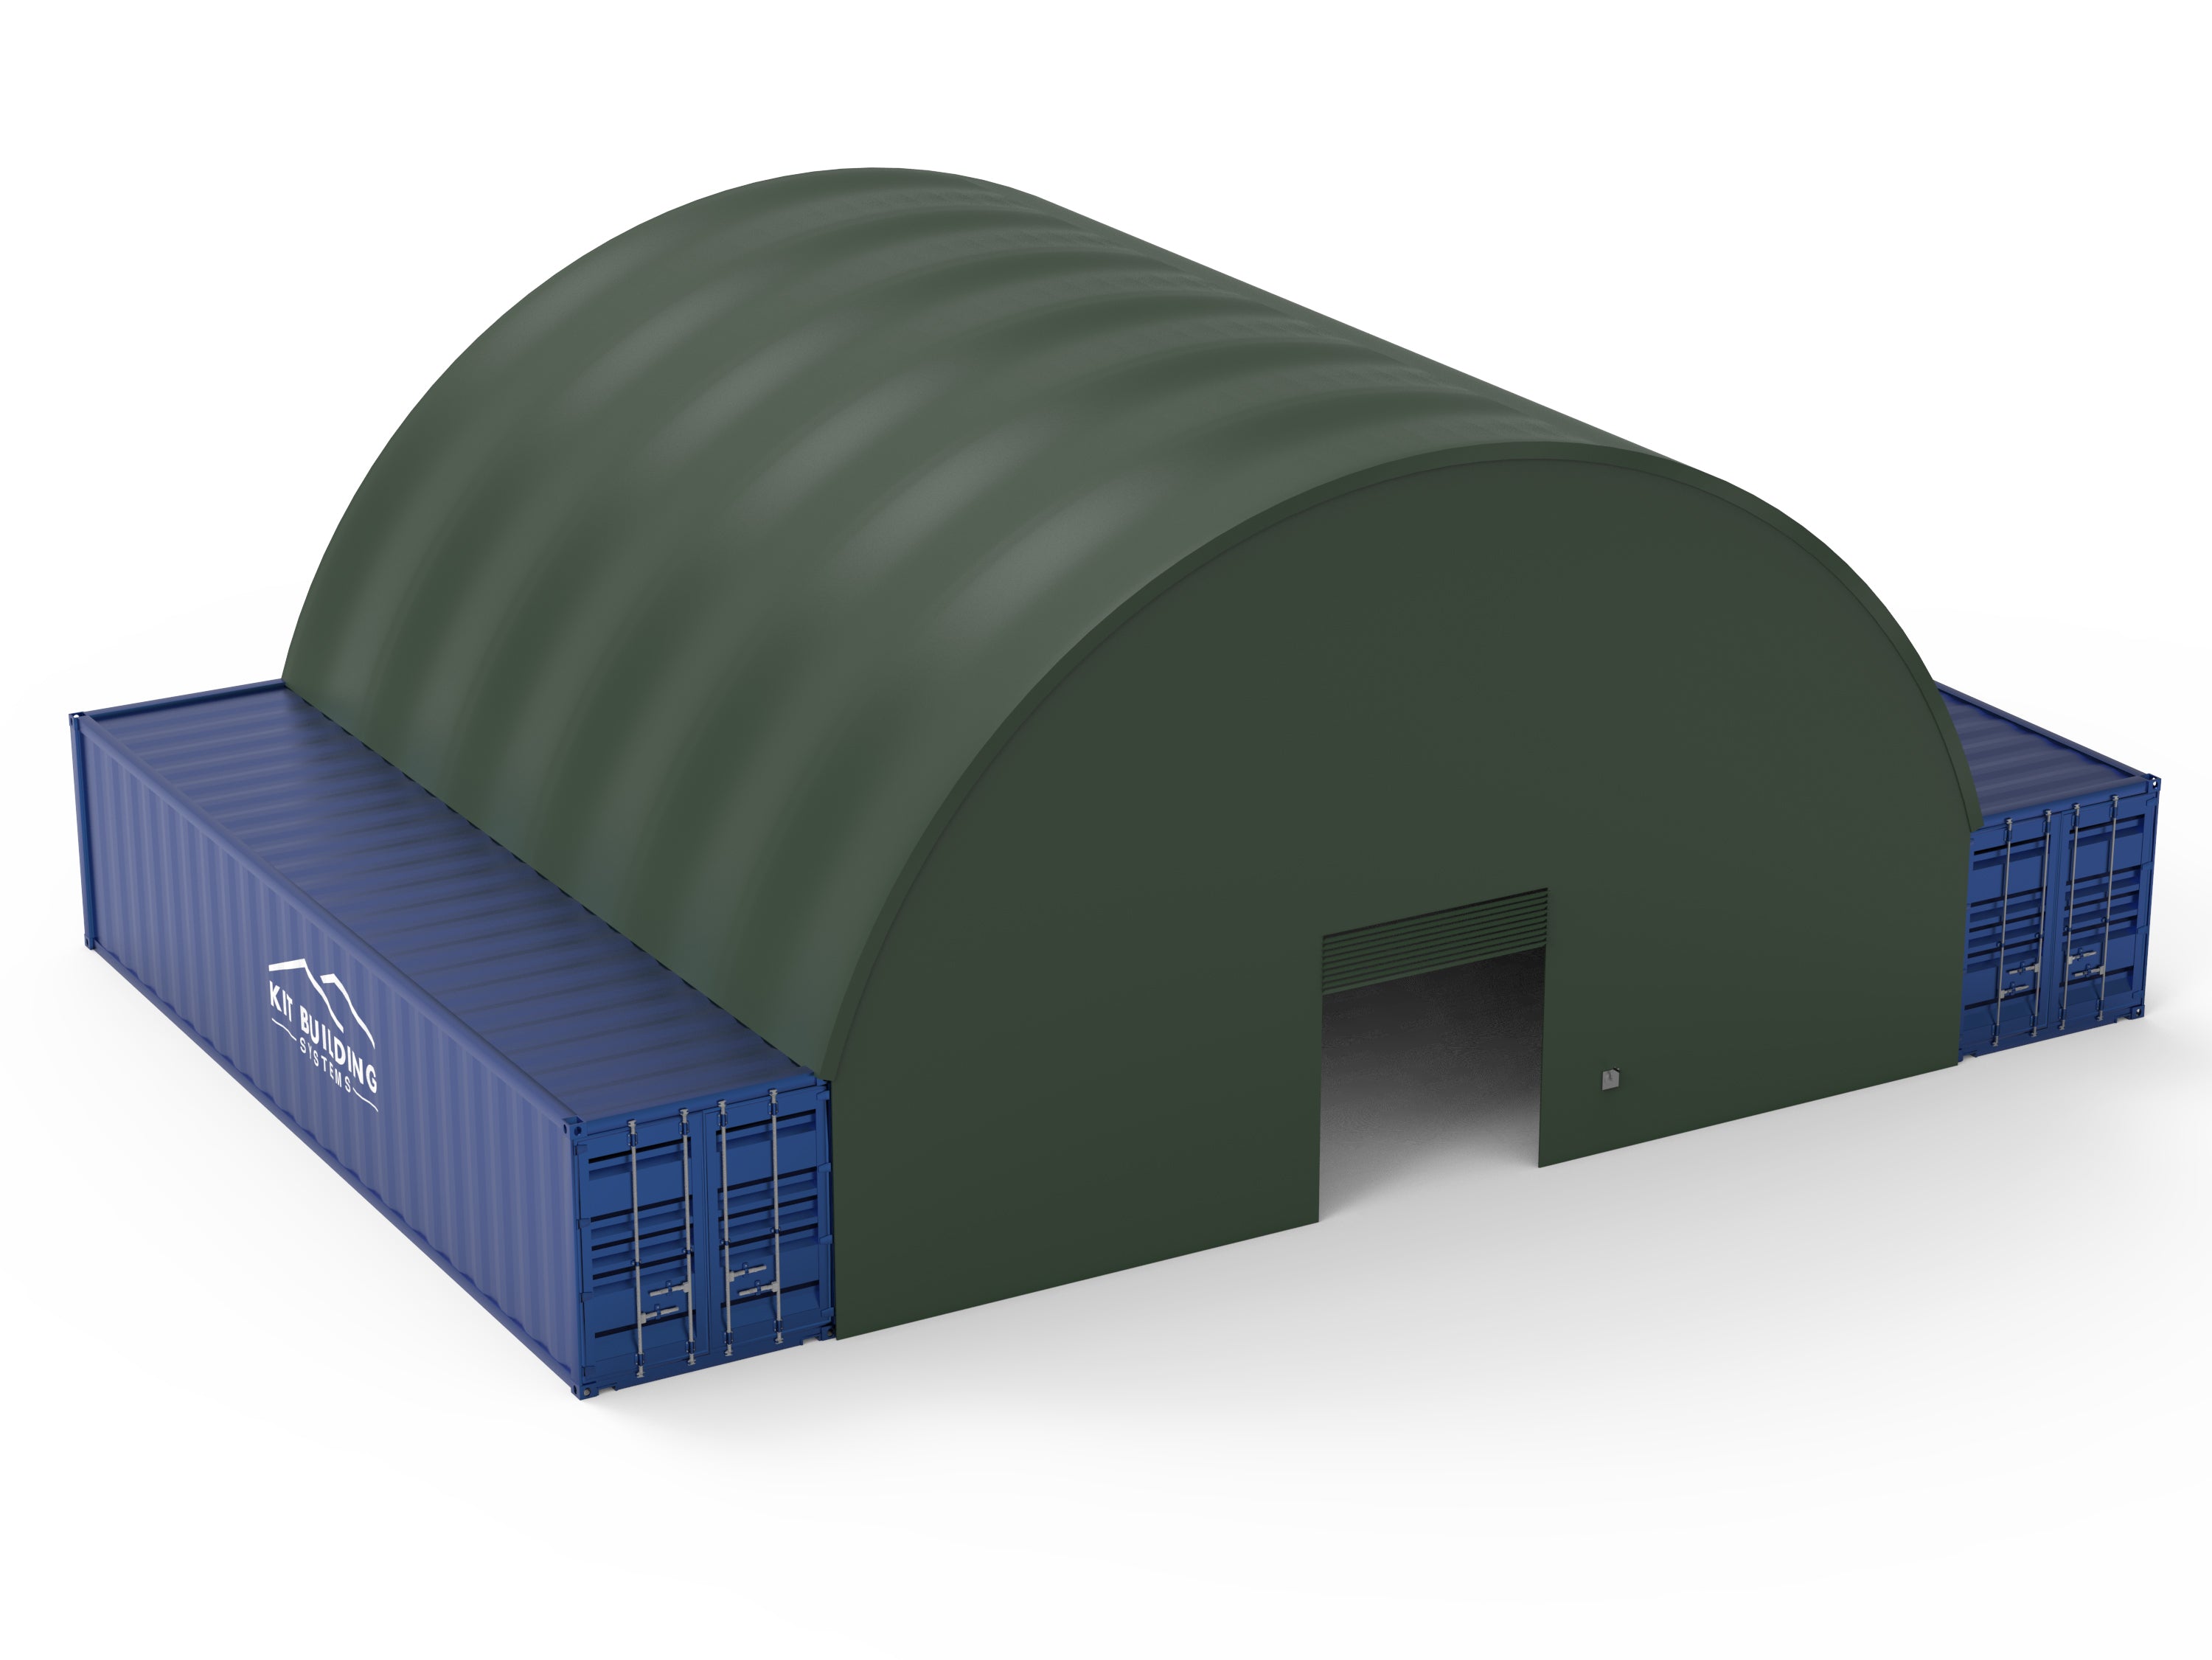 Container Shelter - 40ft x 40ft x 15ft (12m x 12m x 4.5m)